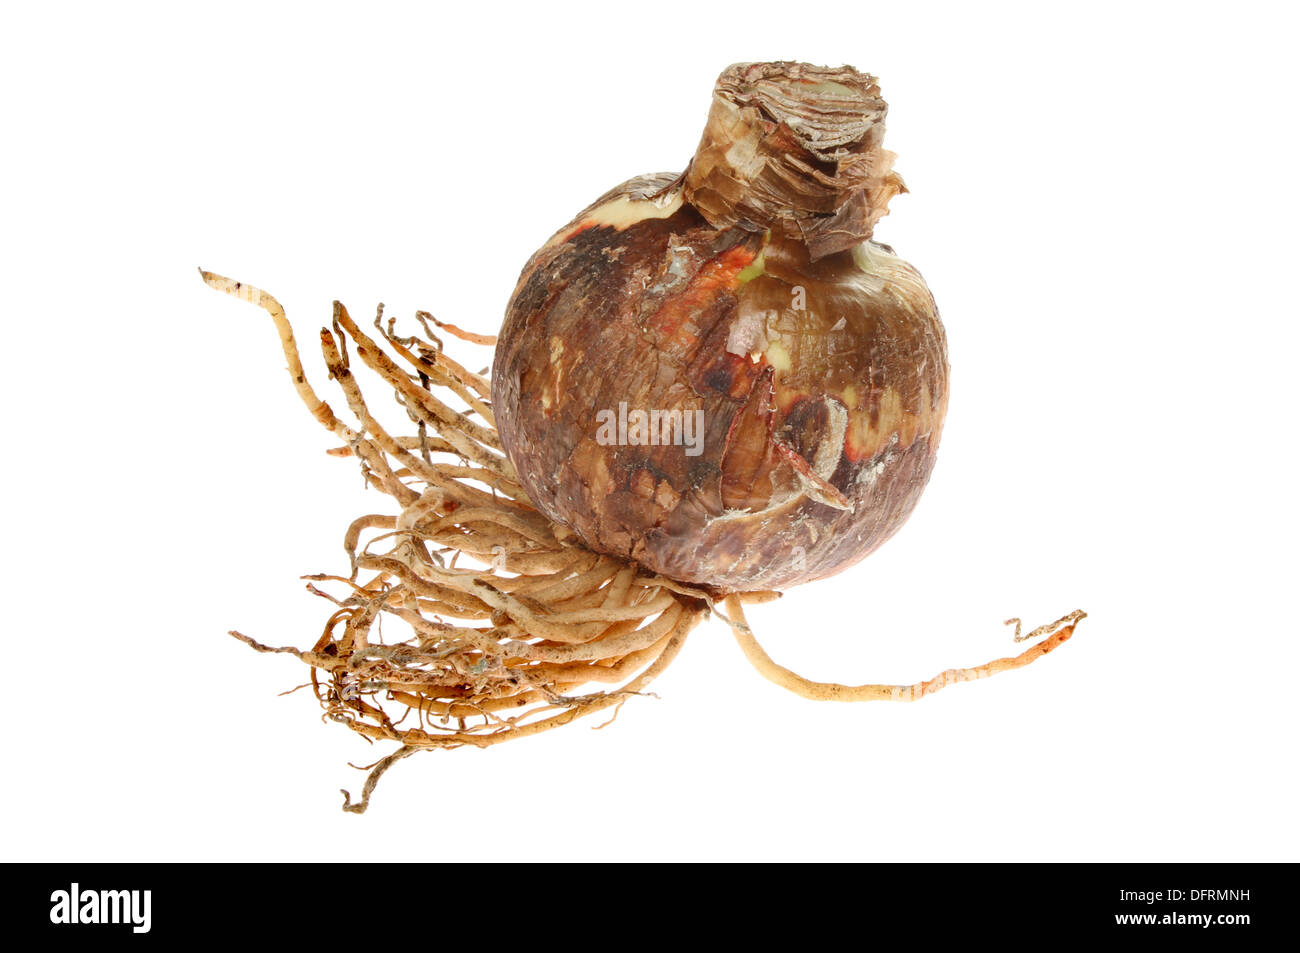 Amaryllis bulb and roots isolated against white Stock Photo